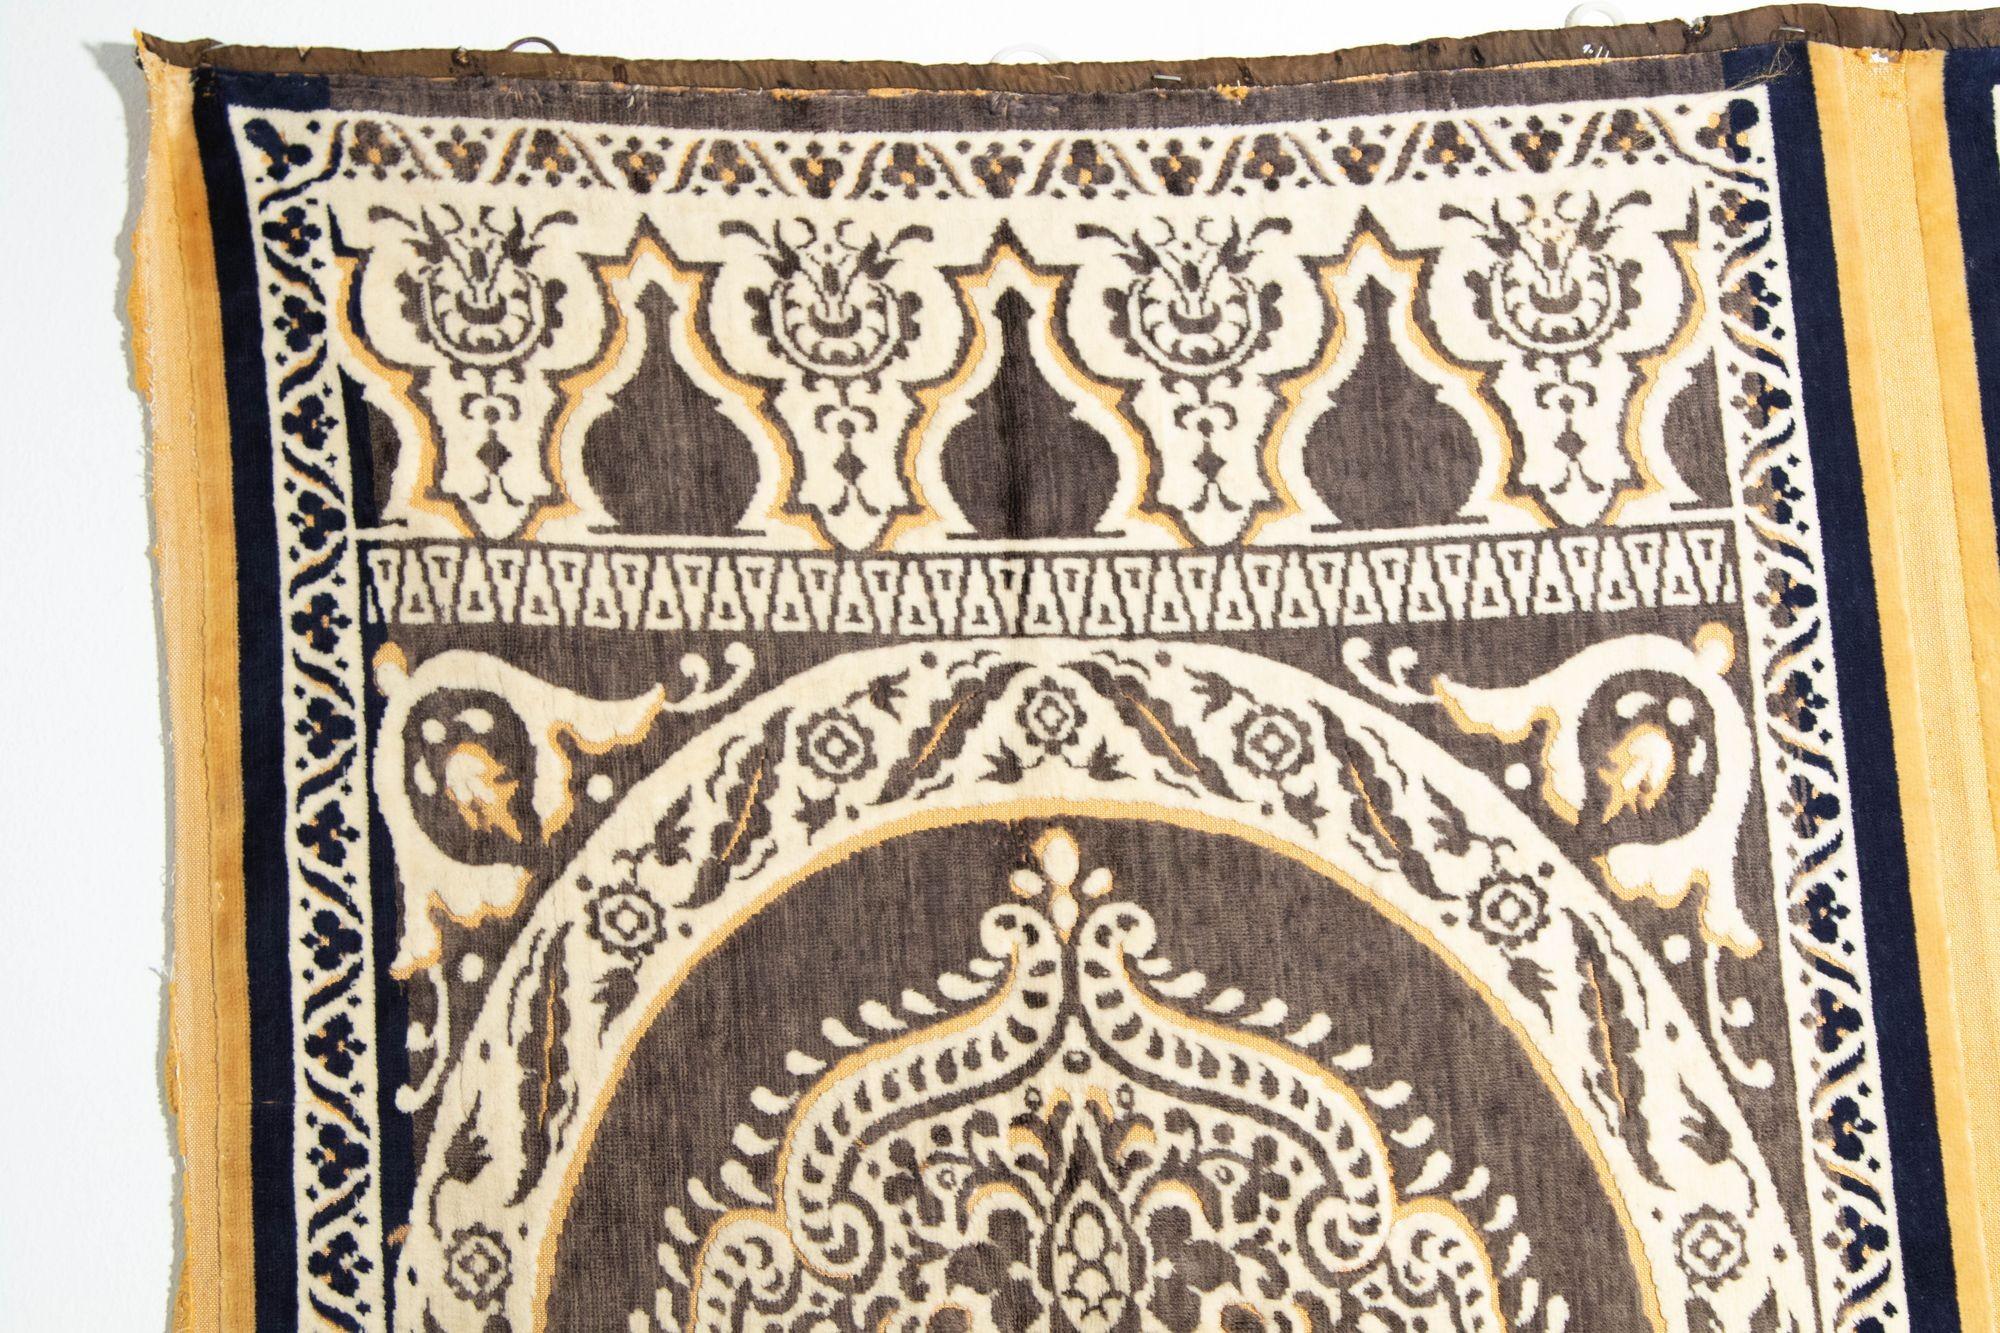 19th Century Antique Moroccan Moorish Silk Textile Tapestry Wall Hanging Hiti 19th C. For Sale